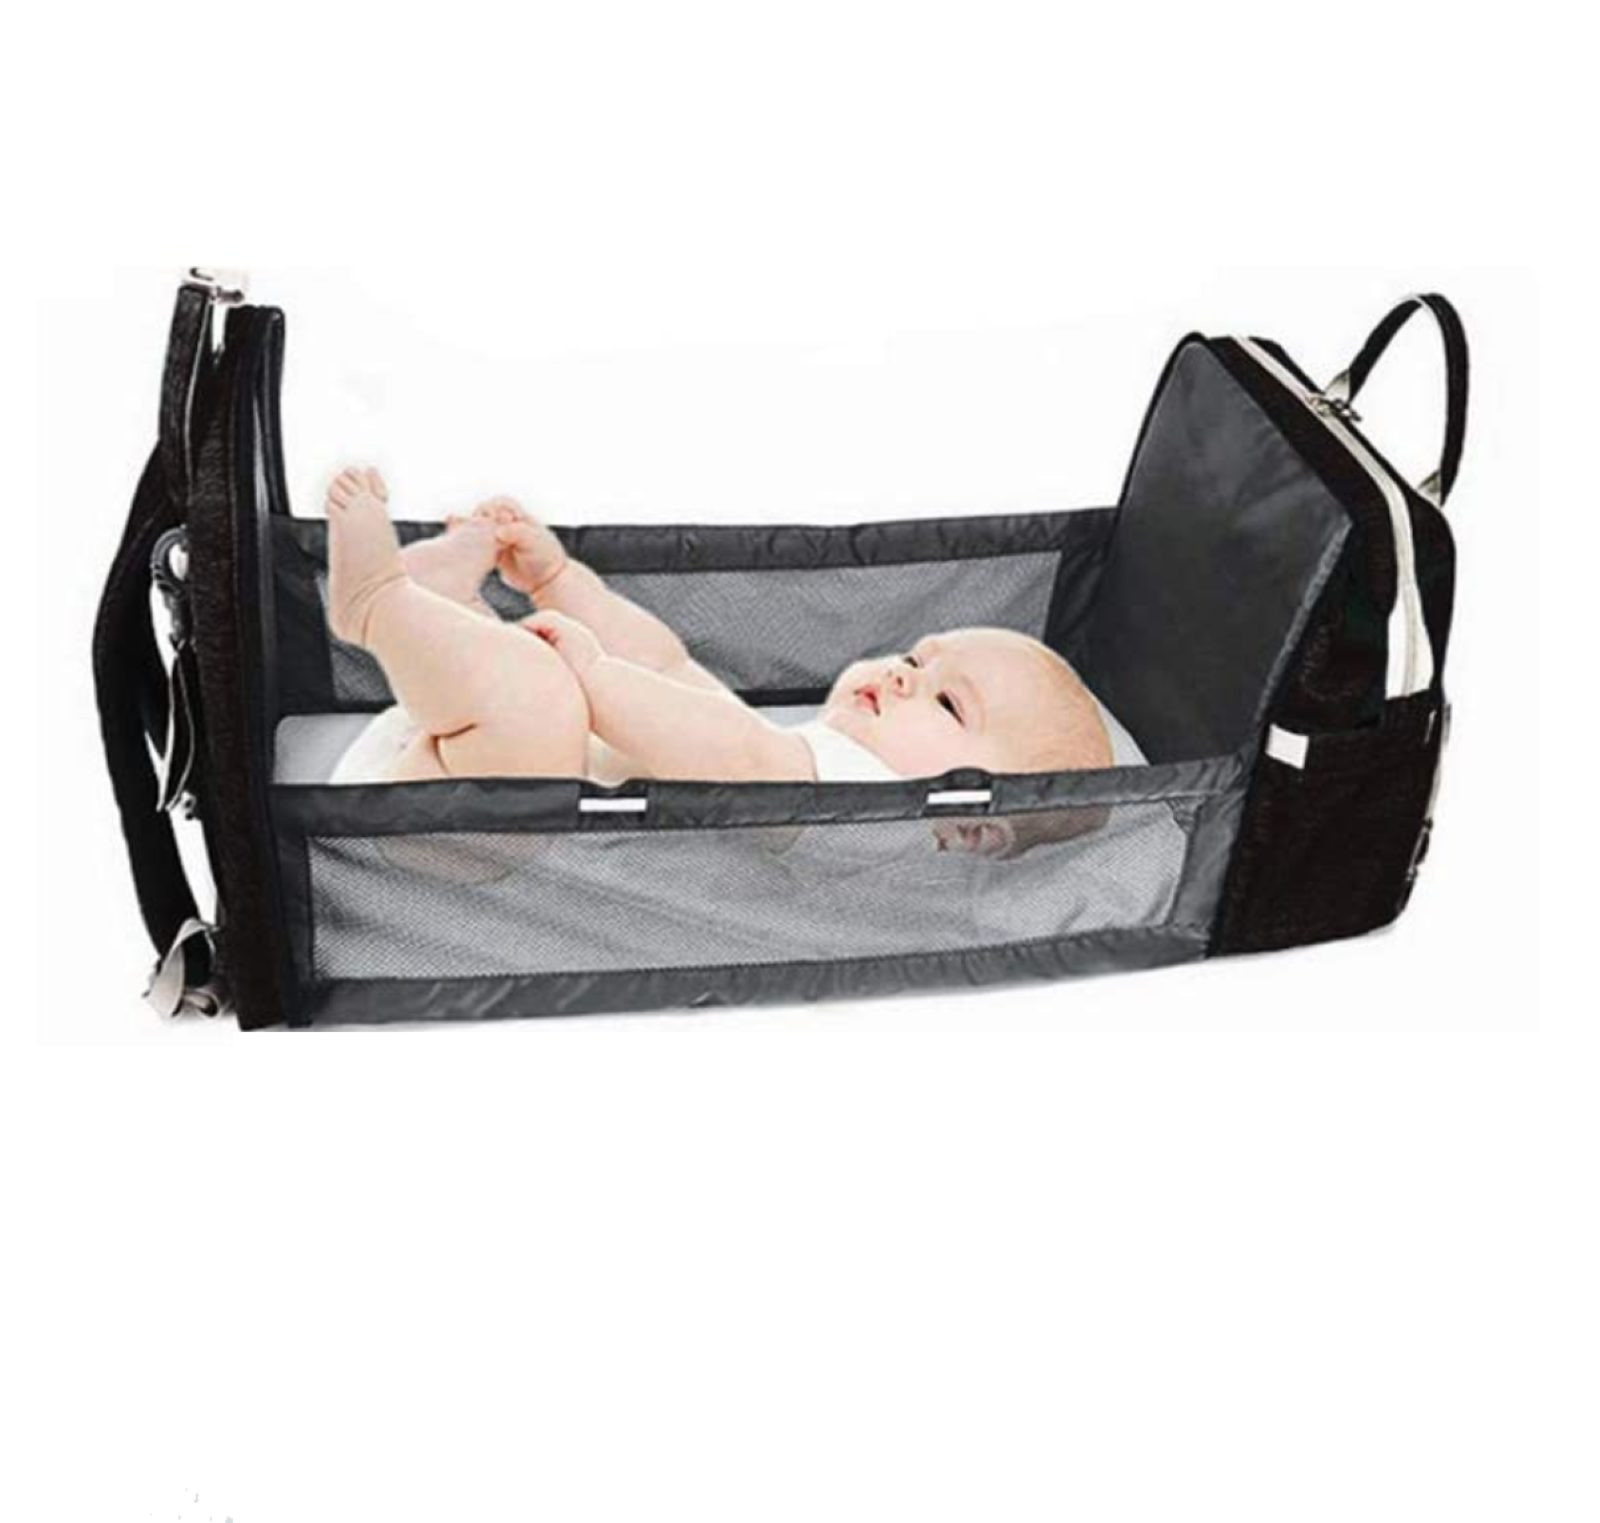 Pikkaboo 4 in 1 Diaper Bag with Changing Station/Crib-Black